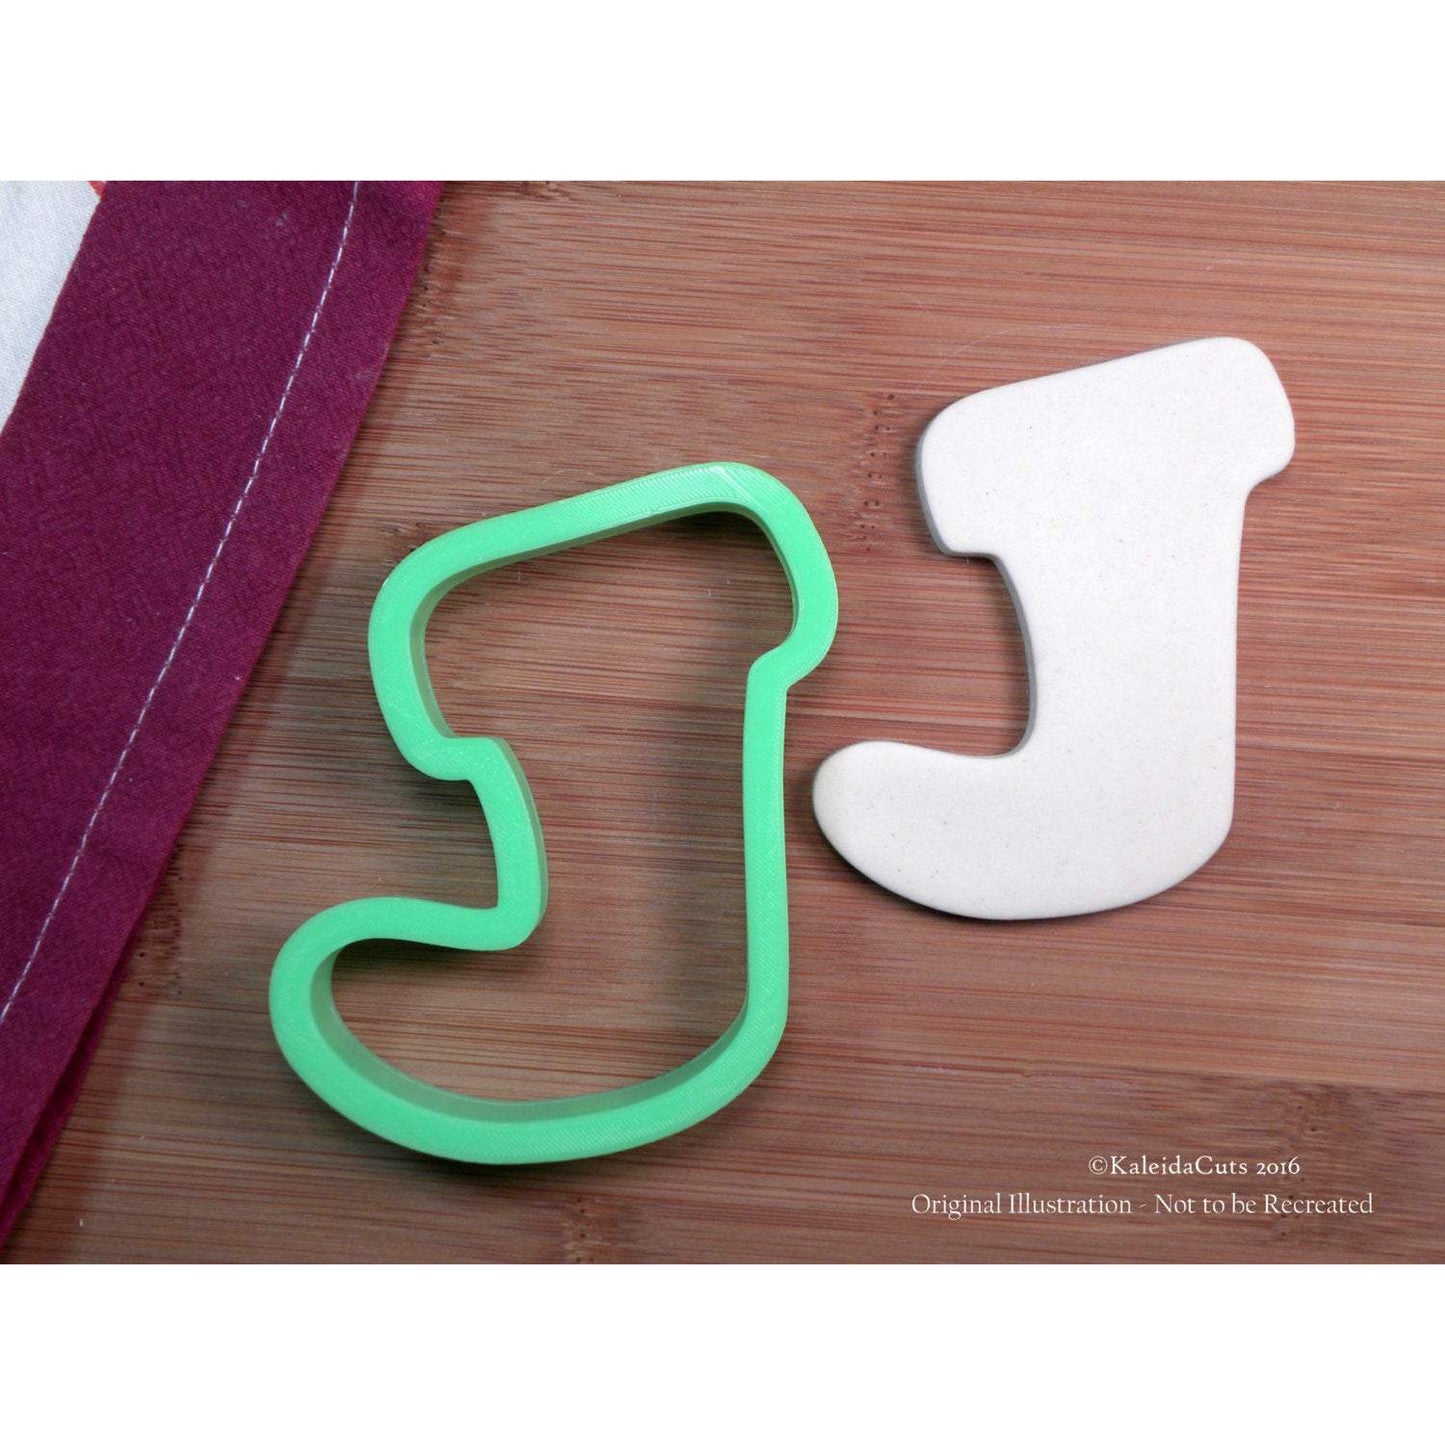 Stocking Cookie Cutter